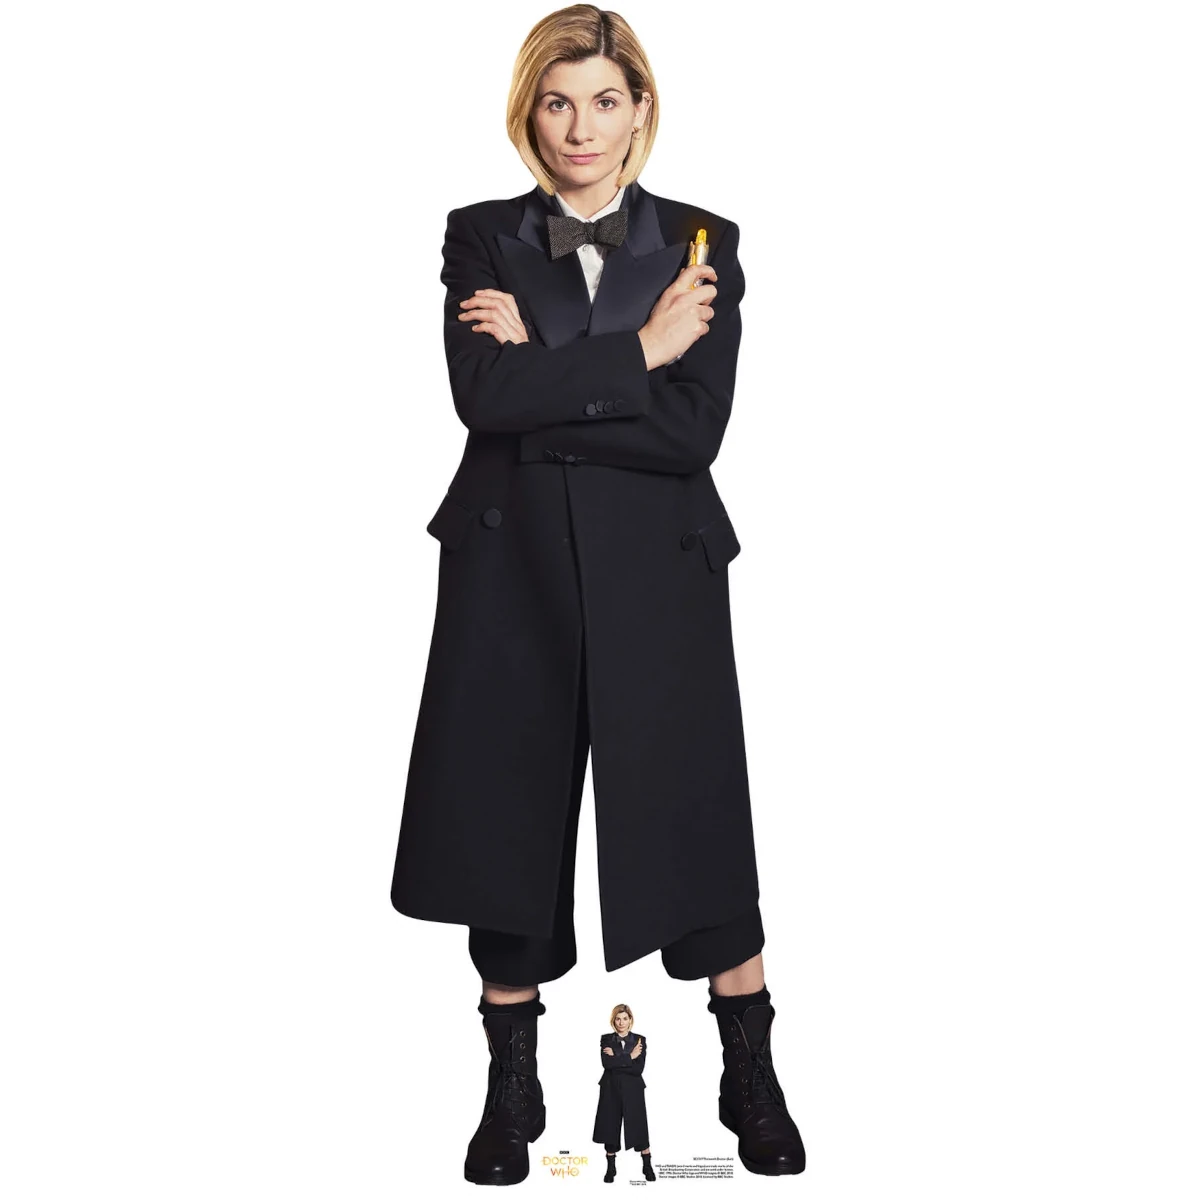 SC1517 The Thirteenth Doctor 'Jodie Whittaker' (Doctor Who) Lifesize + Mini Cardboard Cutout Standee Front